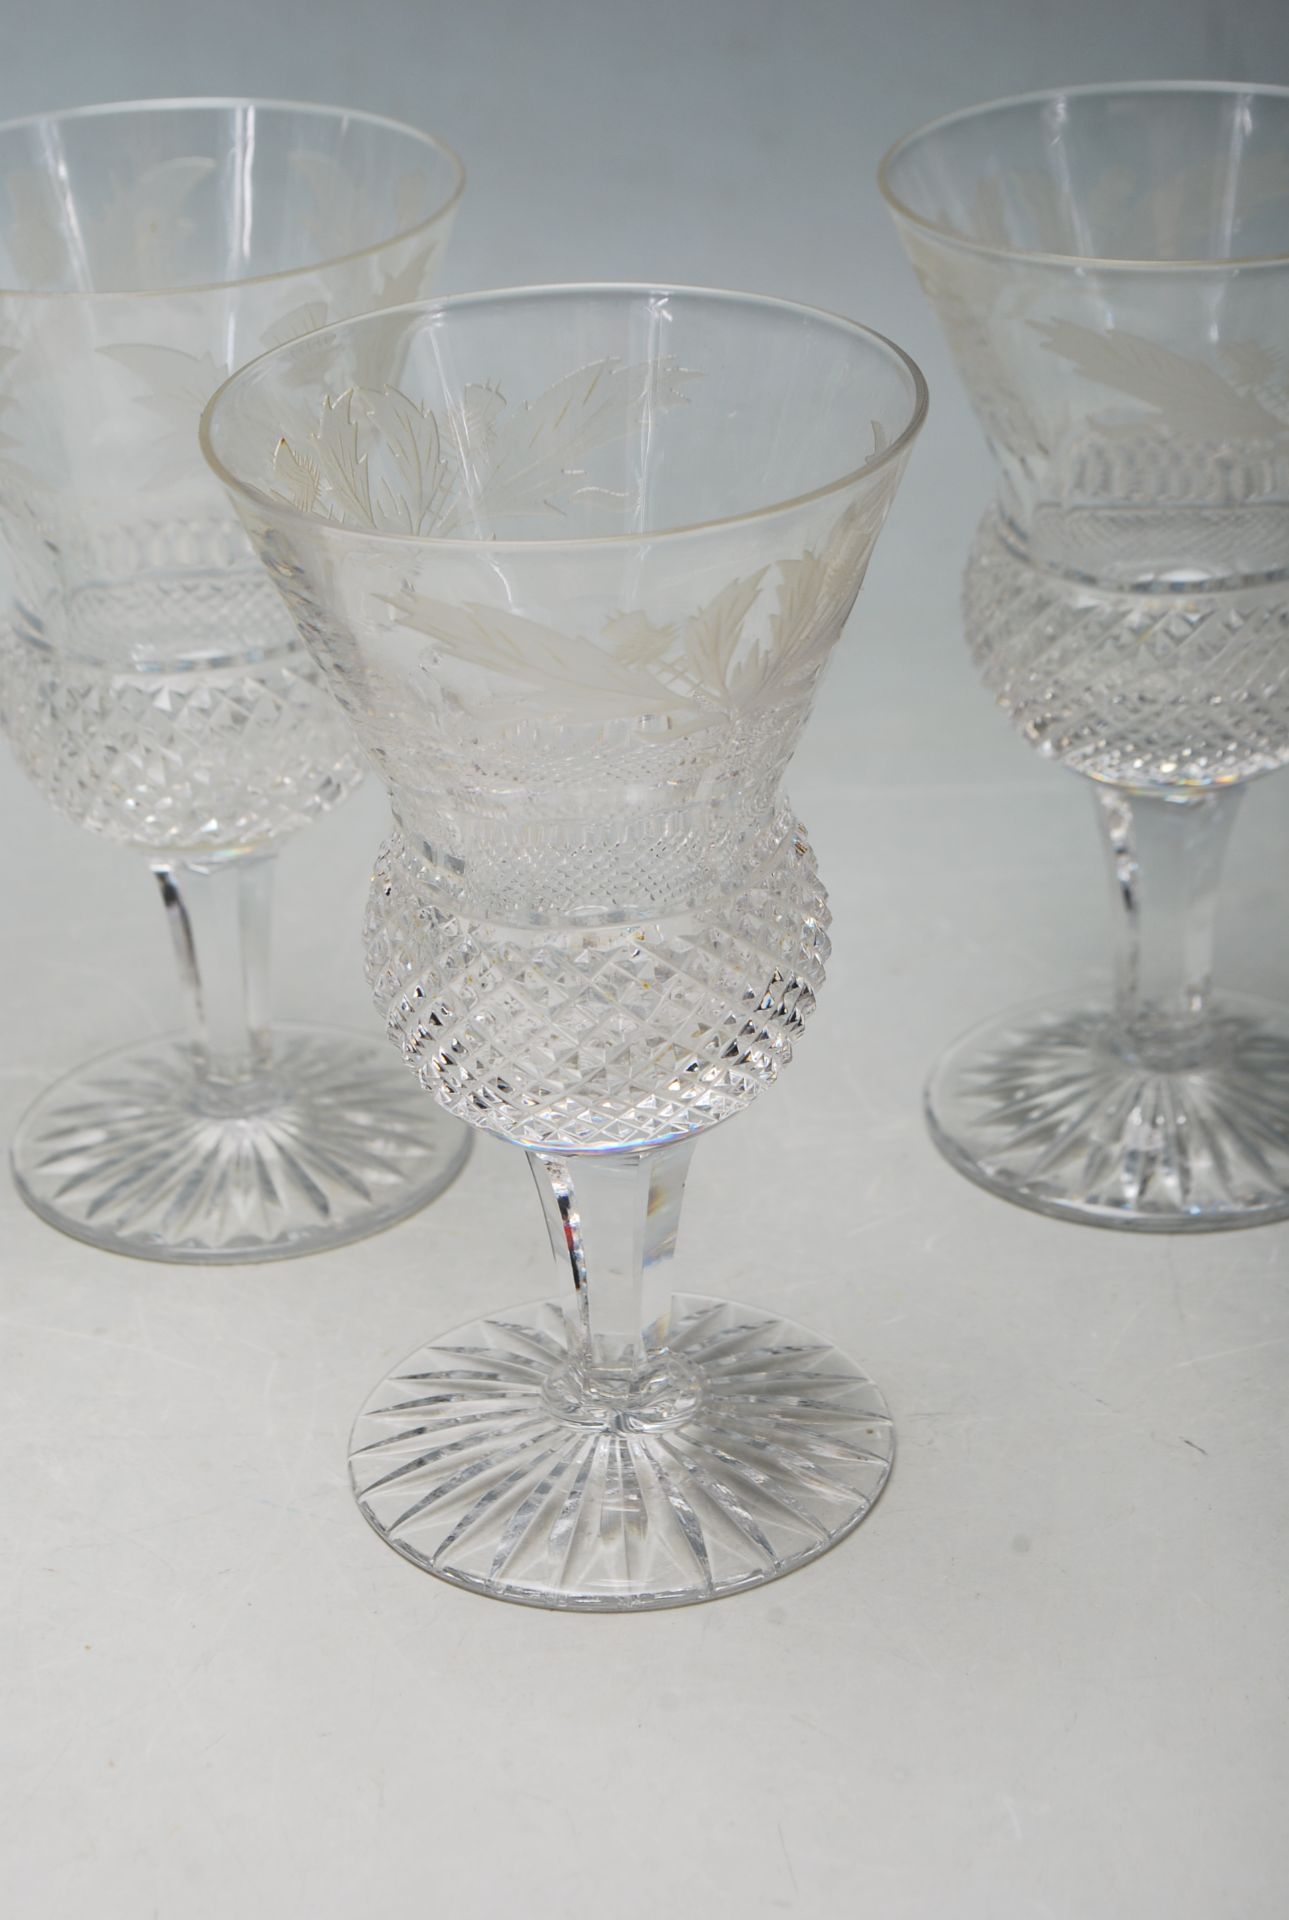 A GROUP OF FIVE EDINBURGH CRYSTAL CUT GLASSES TOGETHER WITH A WINE / CLARET JUG - Image 3 of 7